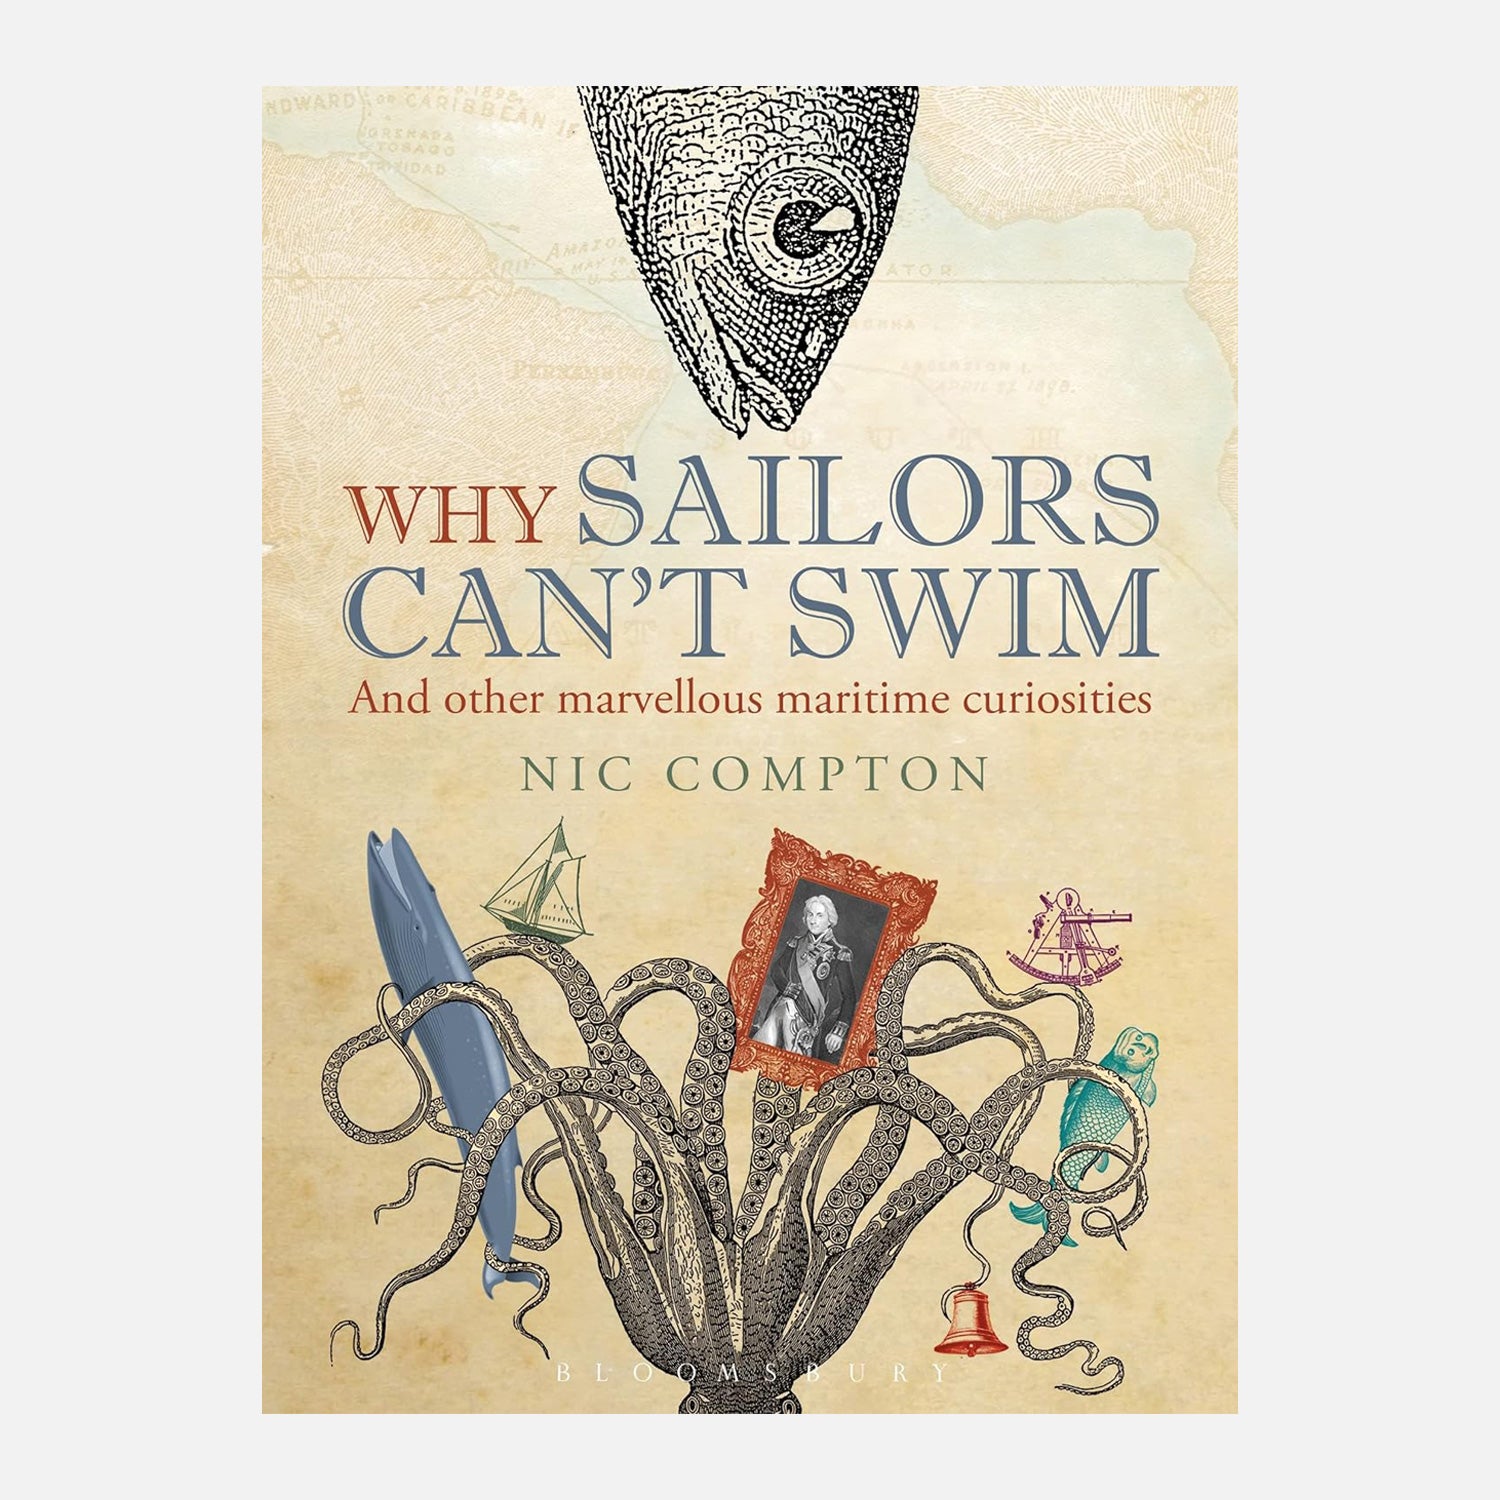 Why Sailors Cant Swim cover image with maritime objects